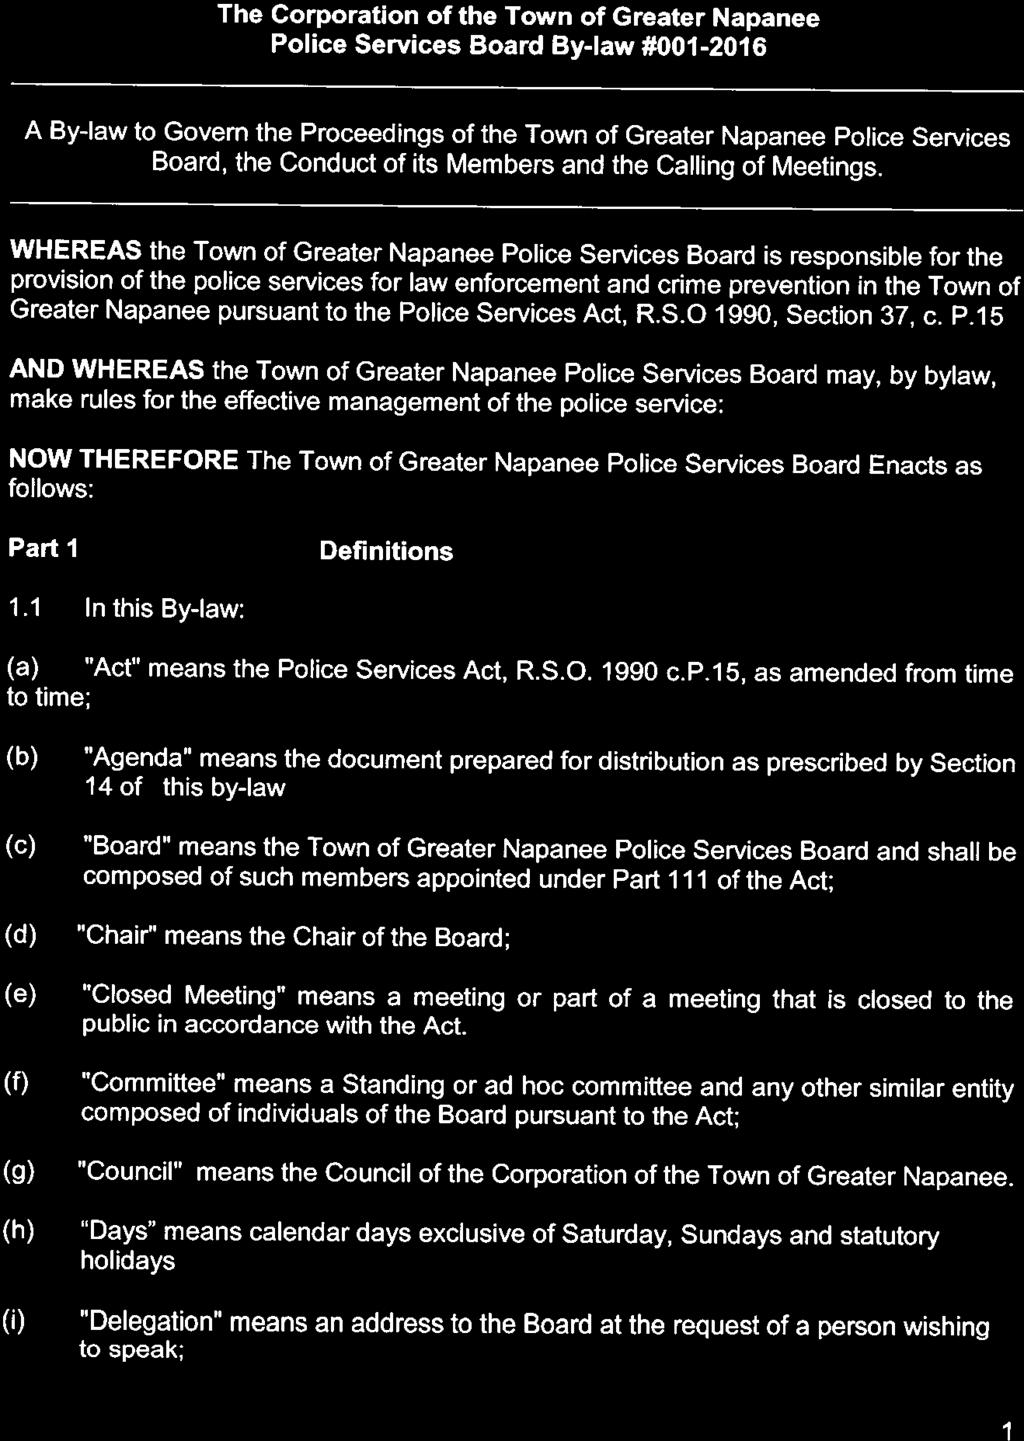 The Corporation of the Town of Greater Napanee Police Services Board By-law #001-2016 A By-law to Govern the Proceedings of the Town of Greater Napanee Police Services Board, the Conduct of its